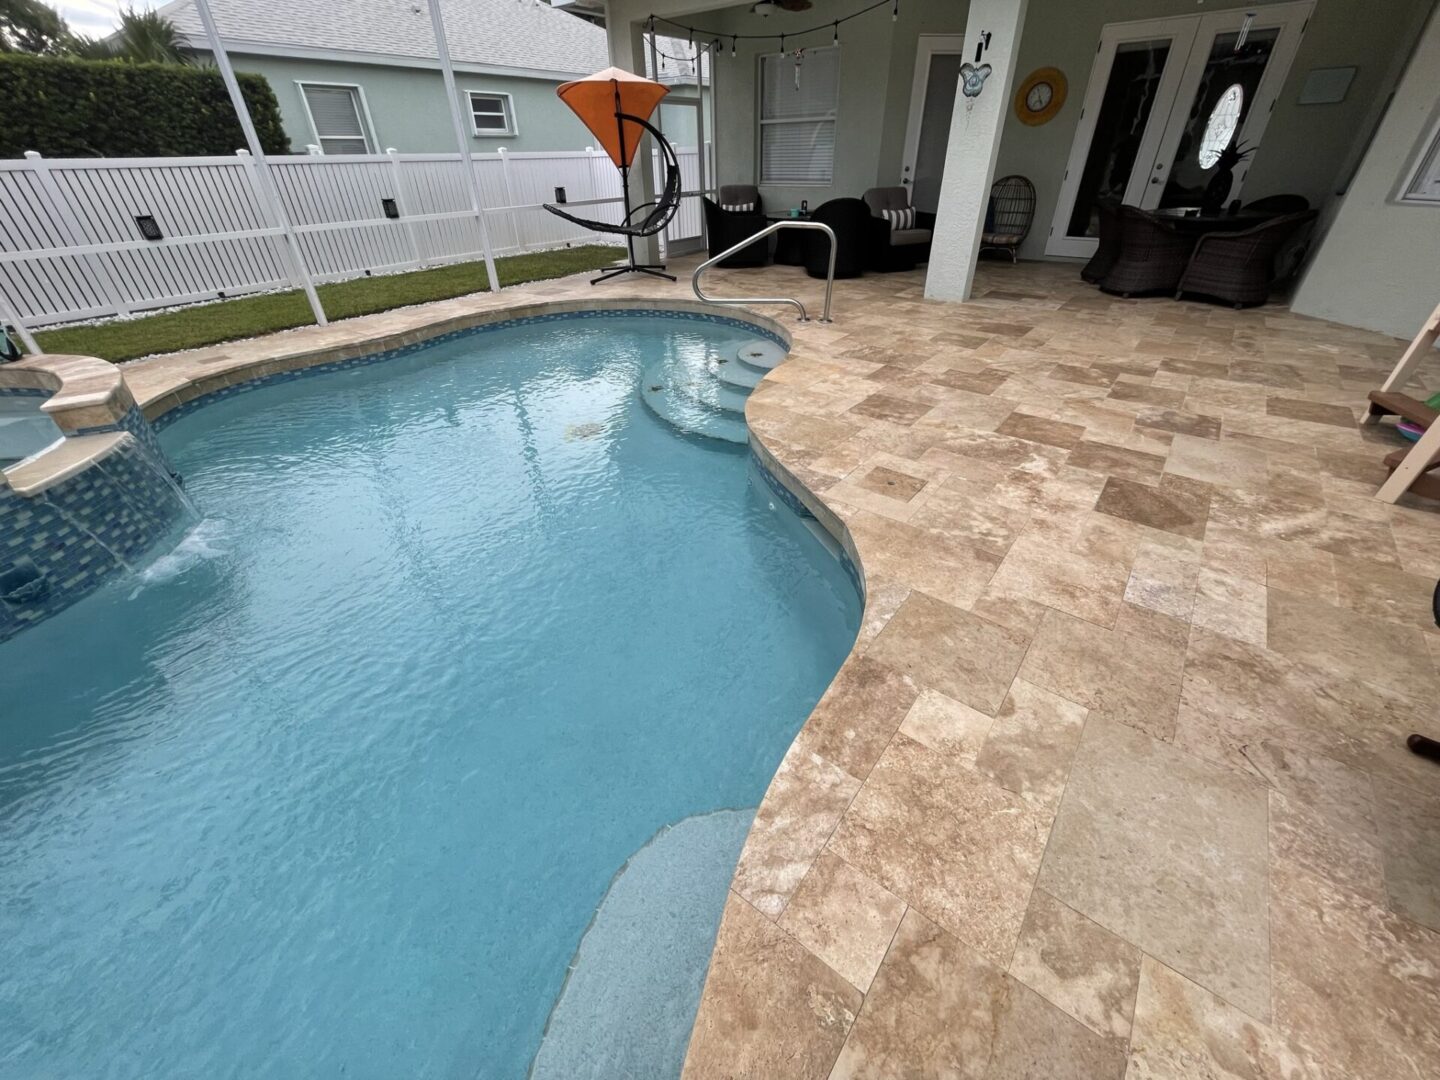 A pool with a tile floor and a deck